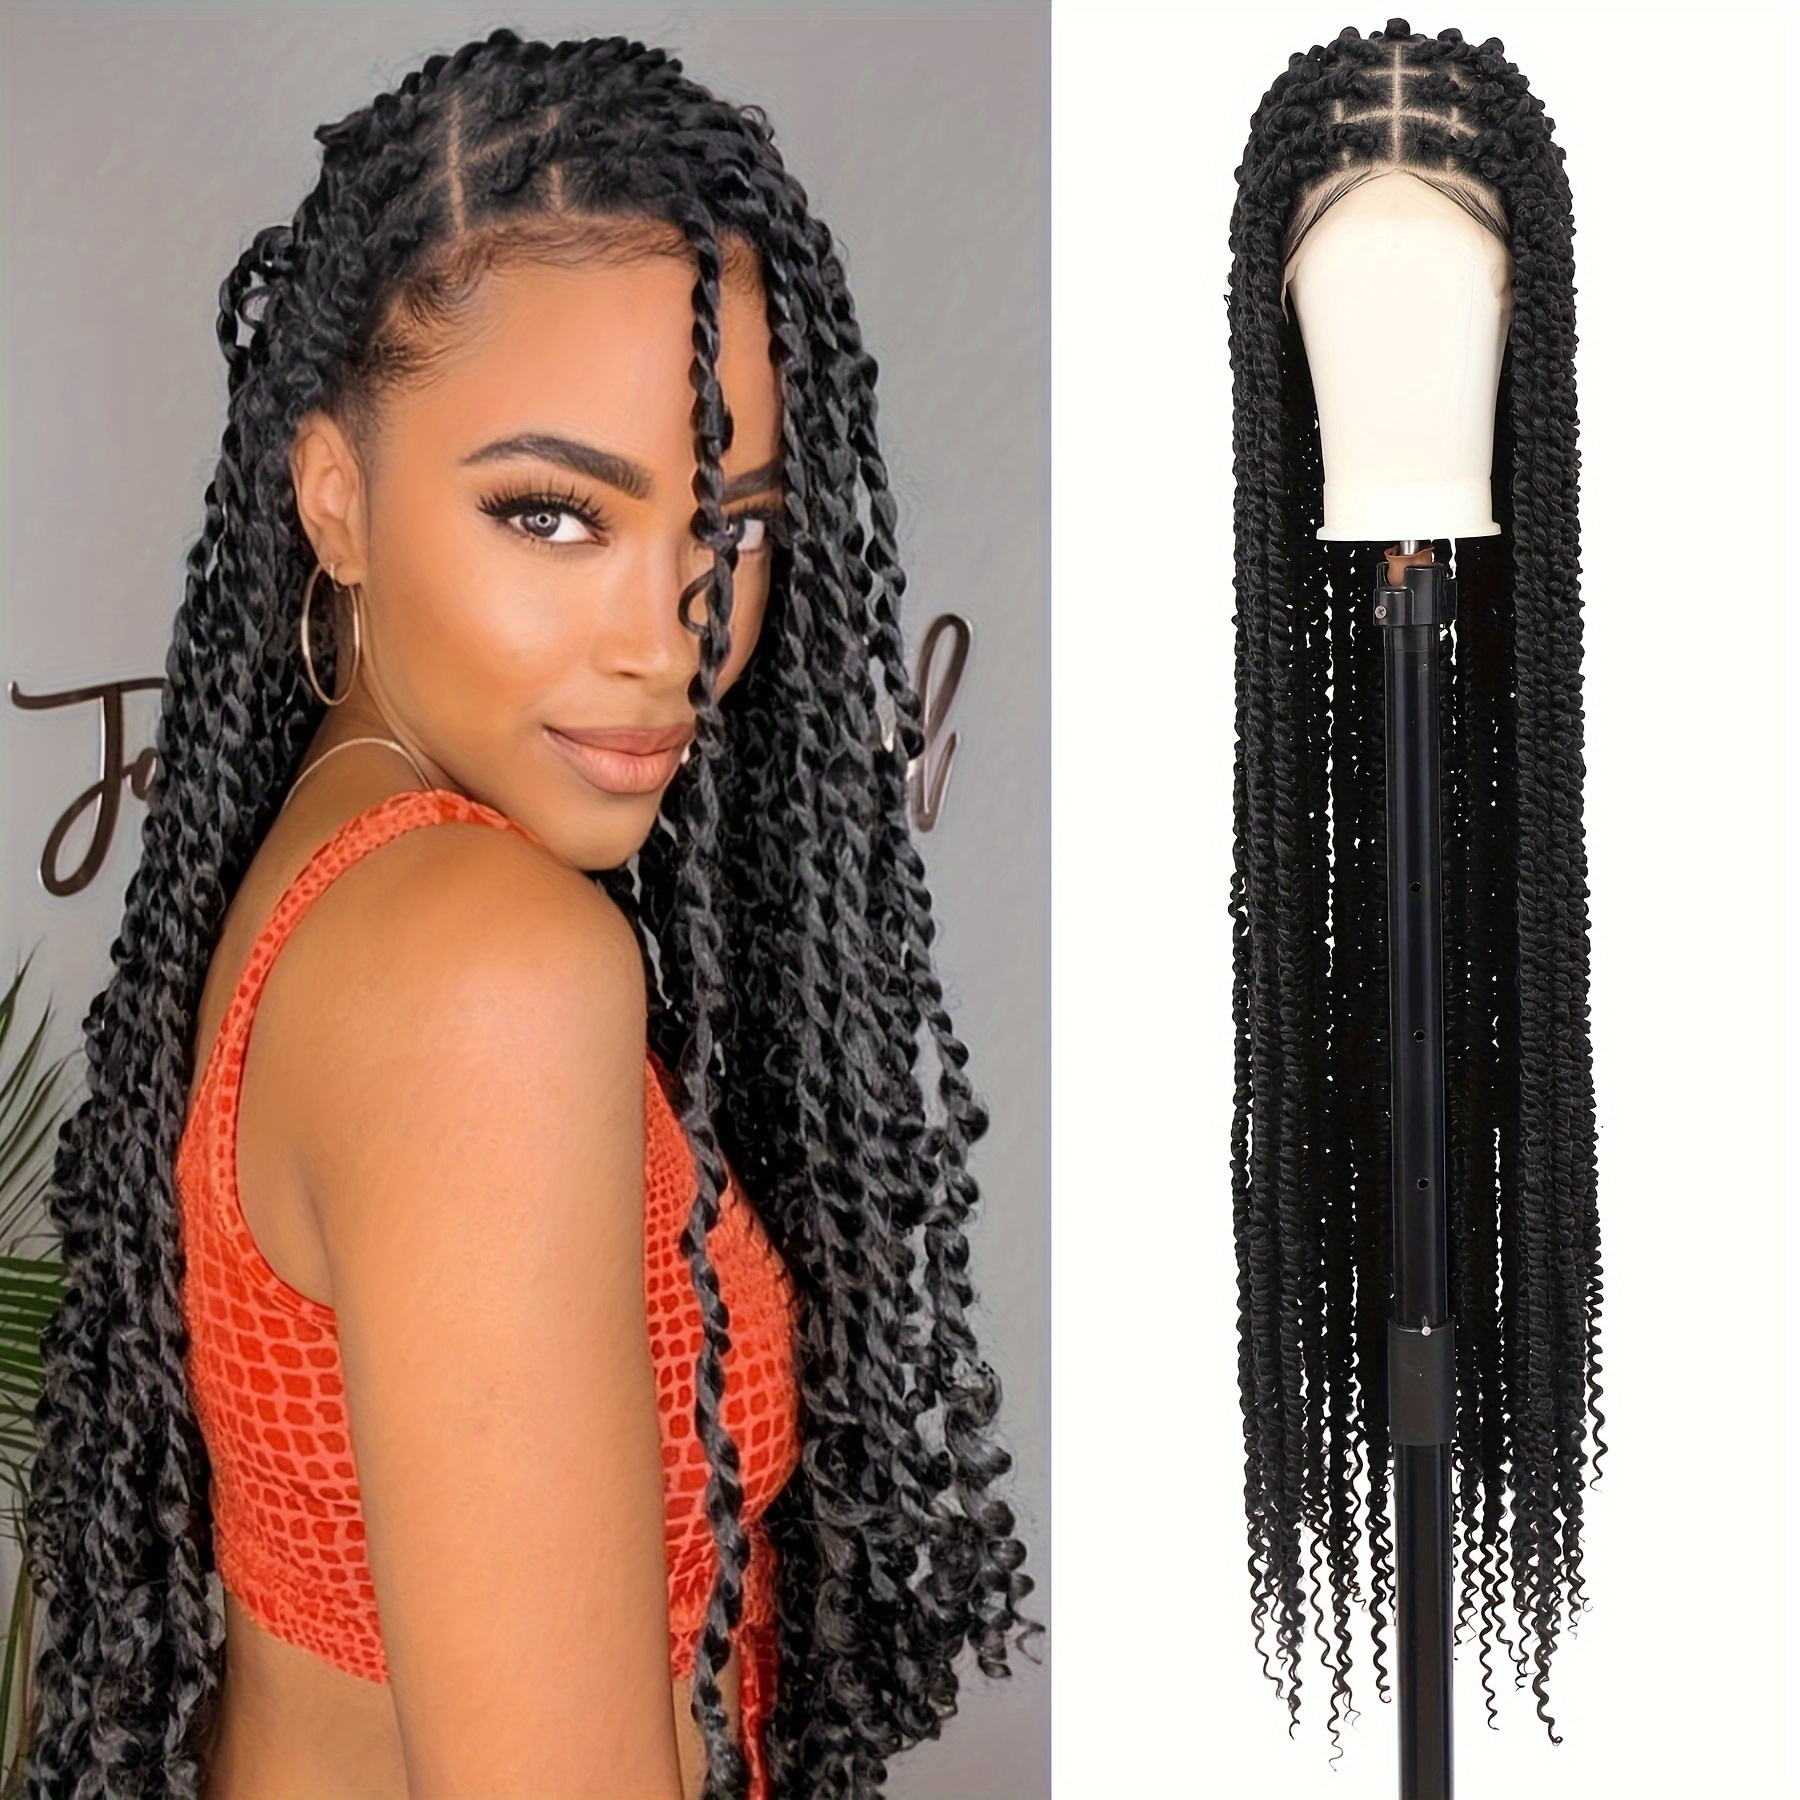 46 Twist Braided Wigs Lace Front Braid Wigs with Baby Hair Embroidery Full  Double Lace Triangle Knotless Twisted Braids Wig for Women Mix Black